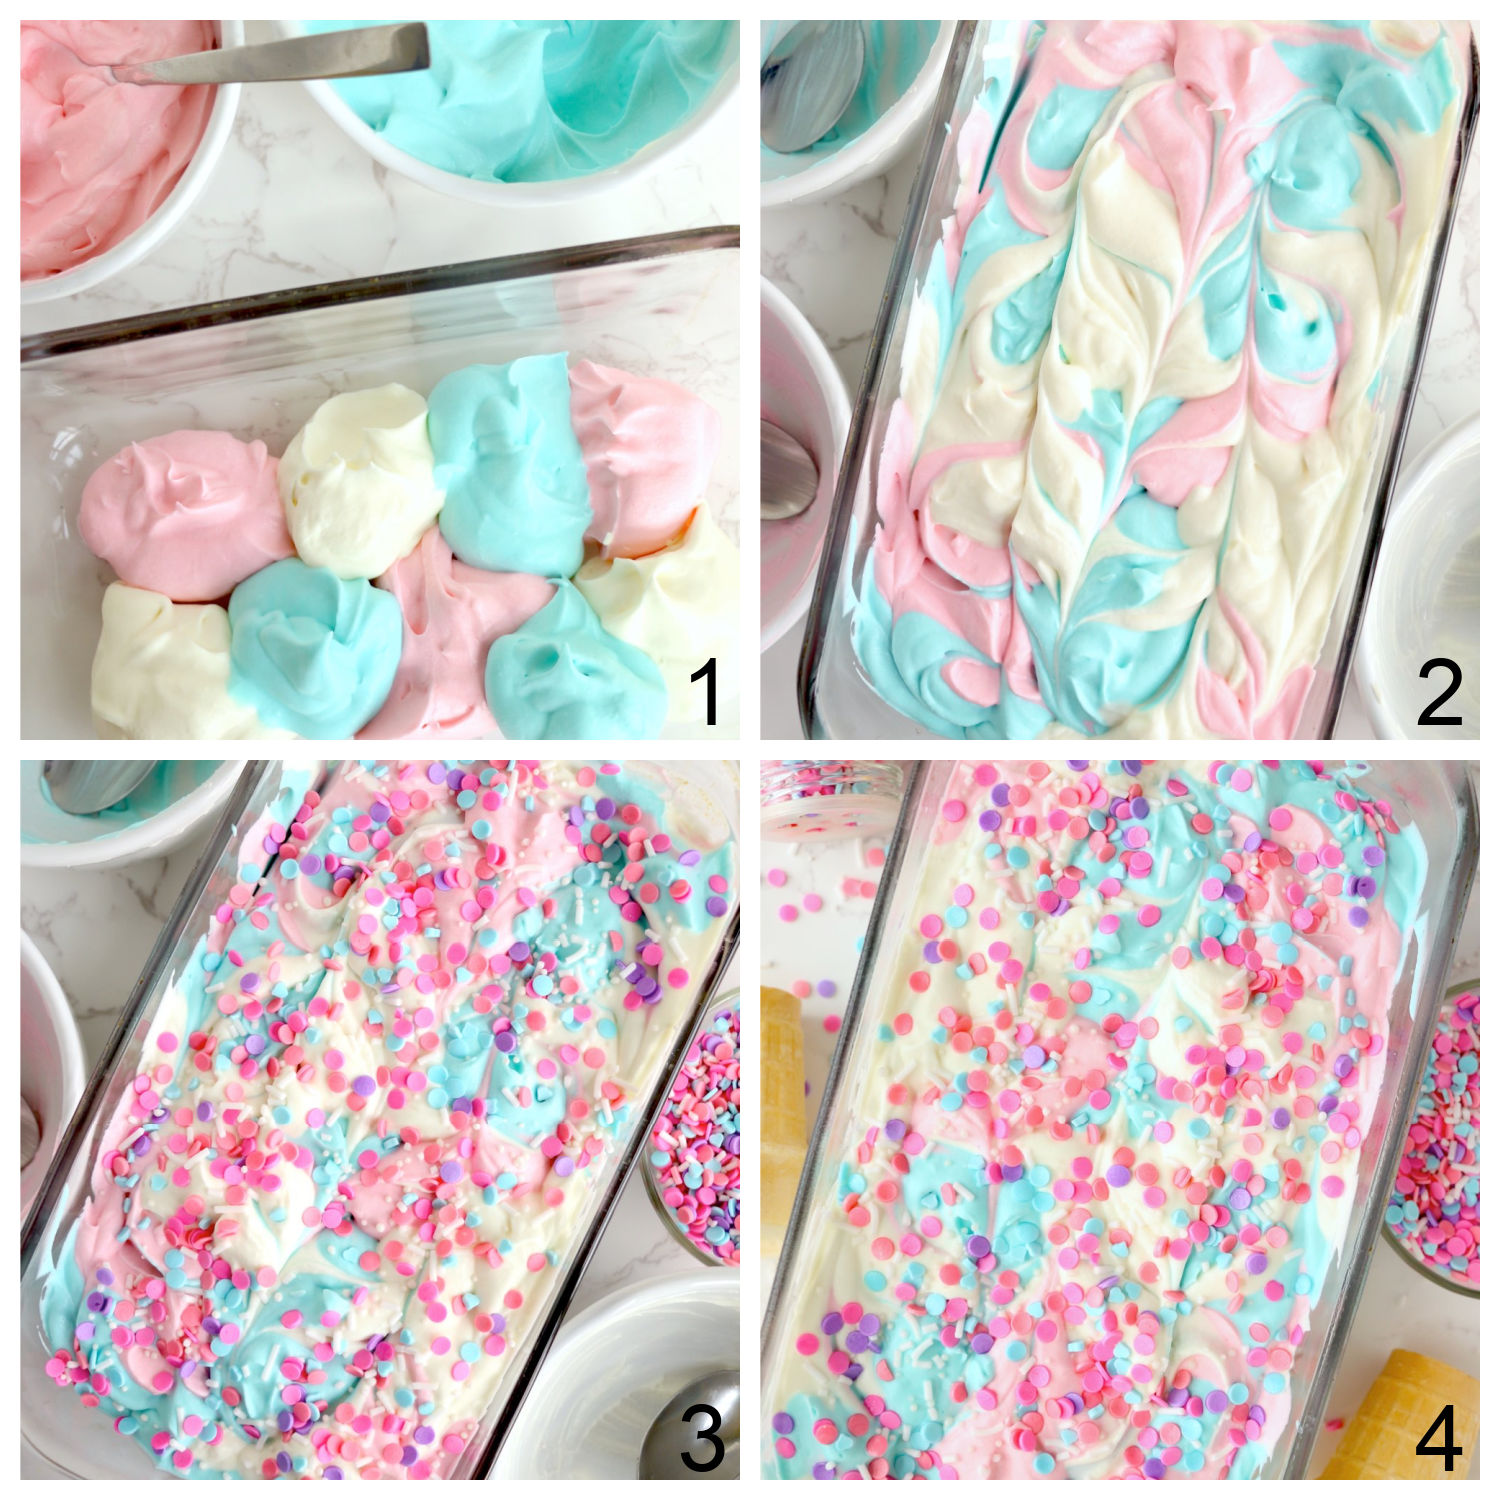 steps for making cotton candy ice cream